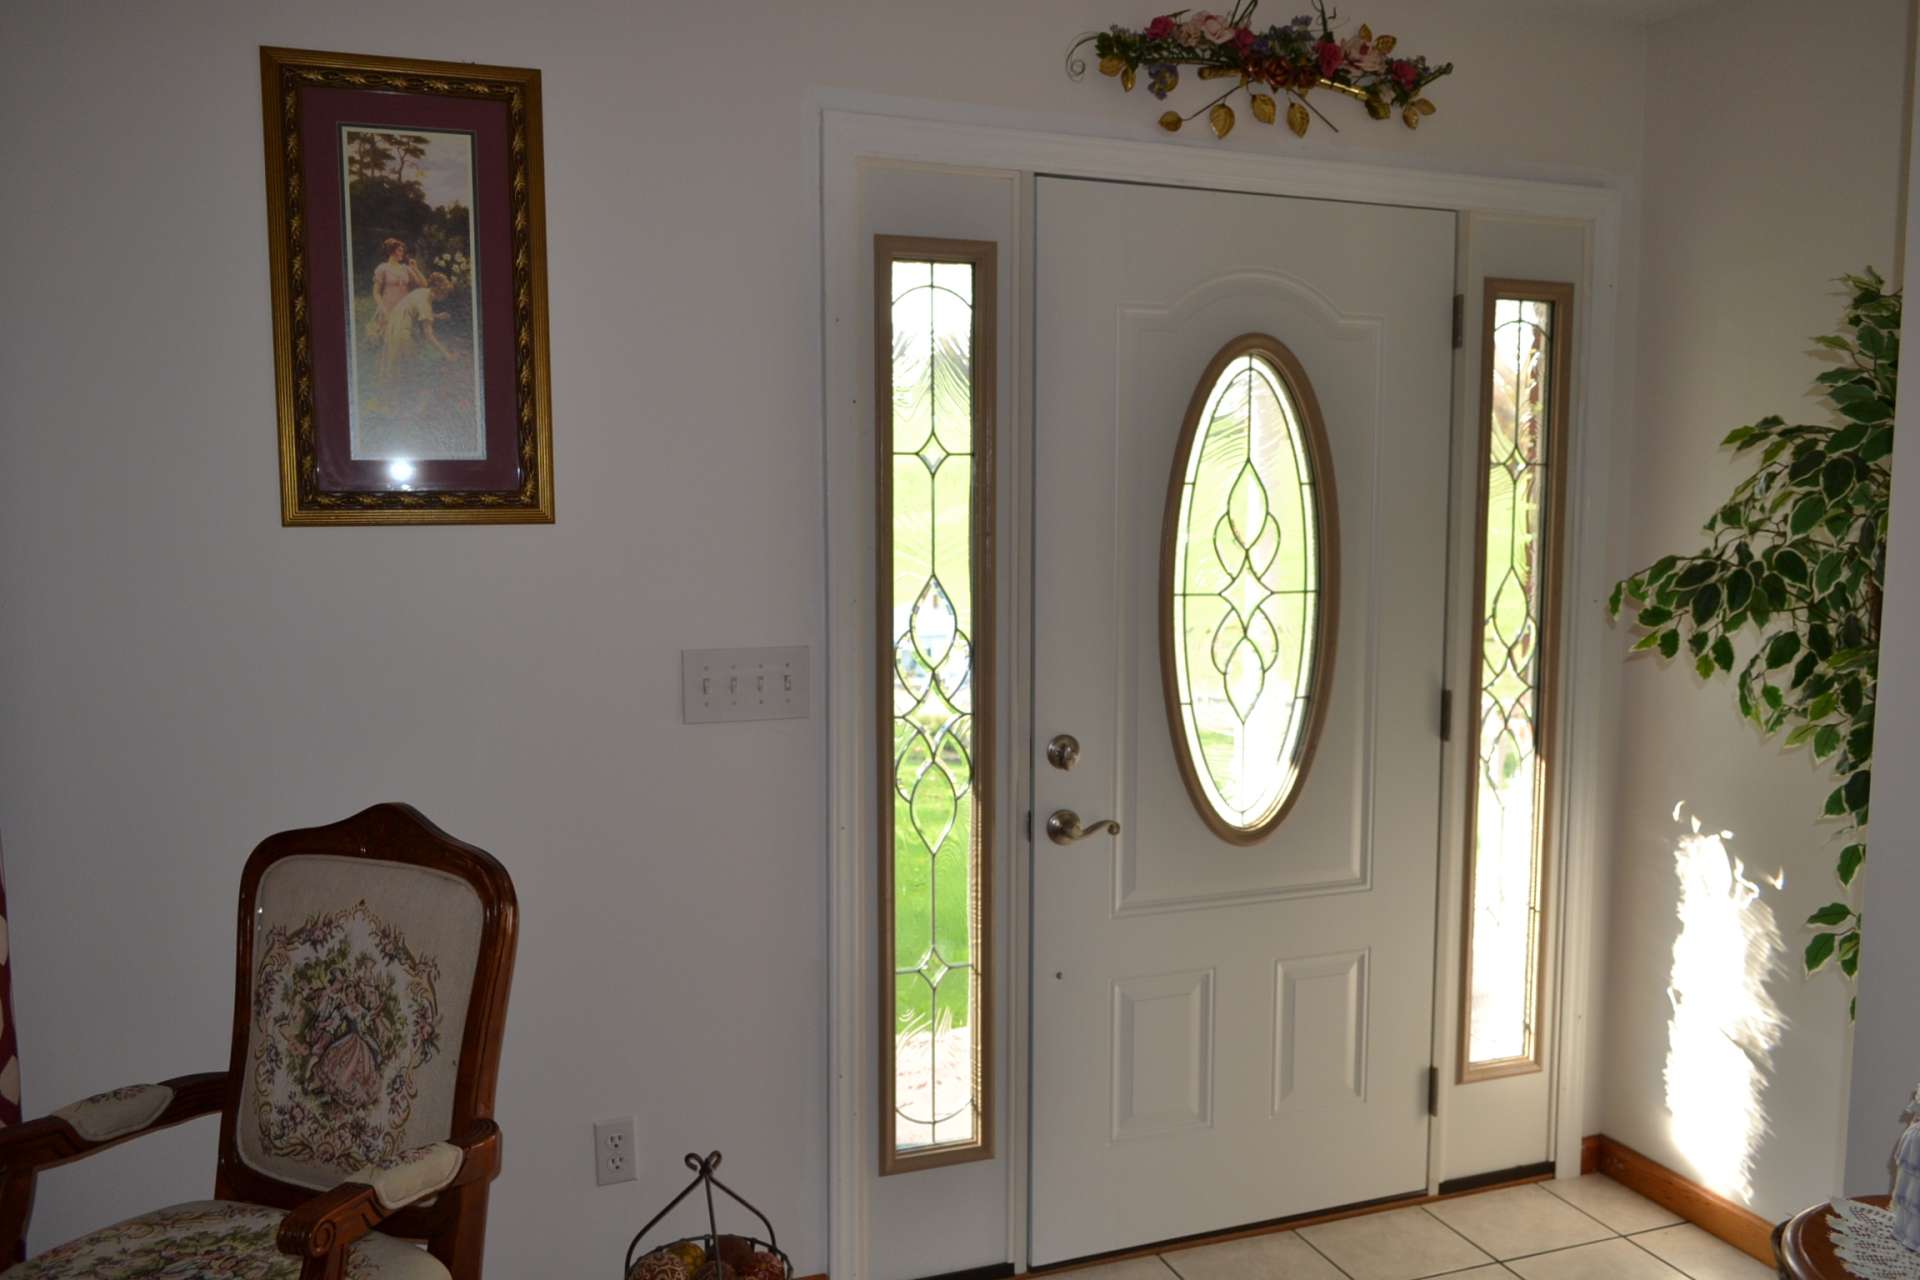 This home welcomes you and guests with lots of custom details such as this front door with beveled glass.